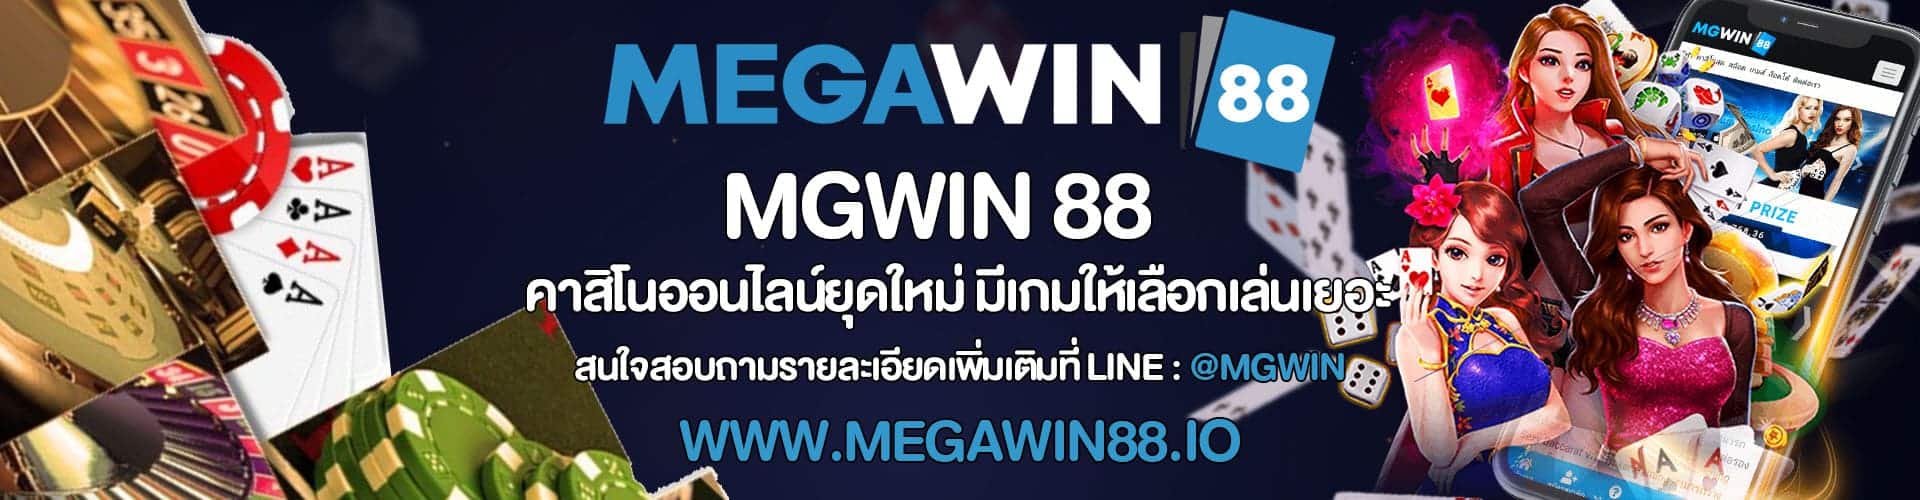 MGWIN 88